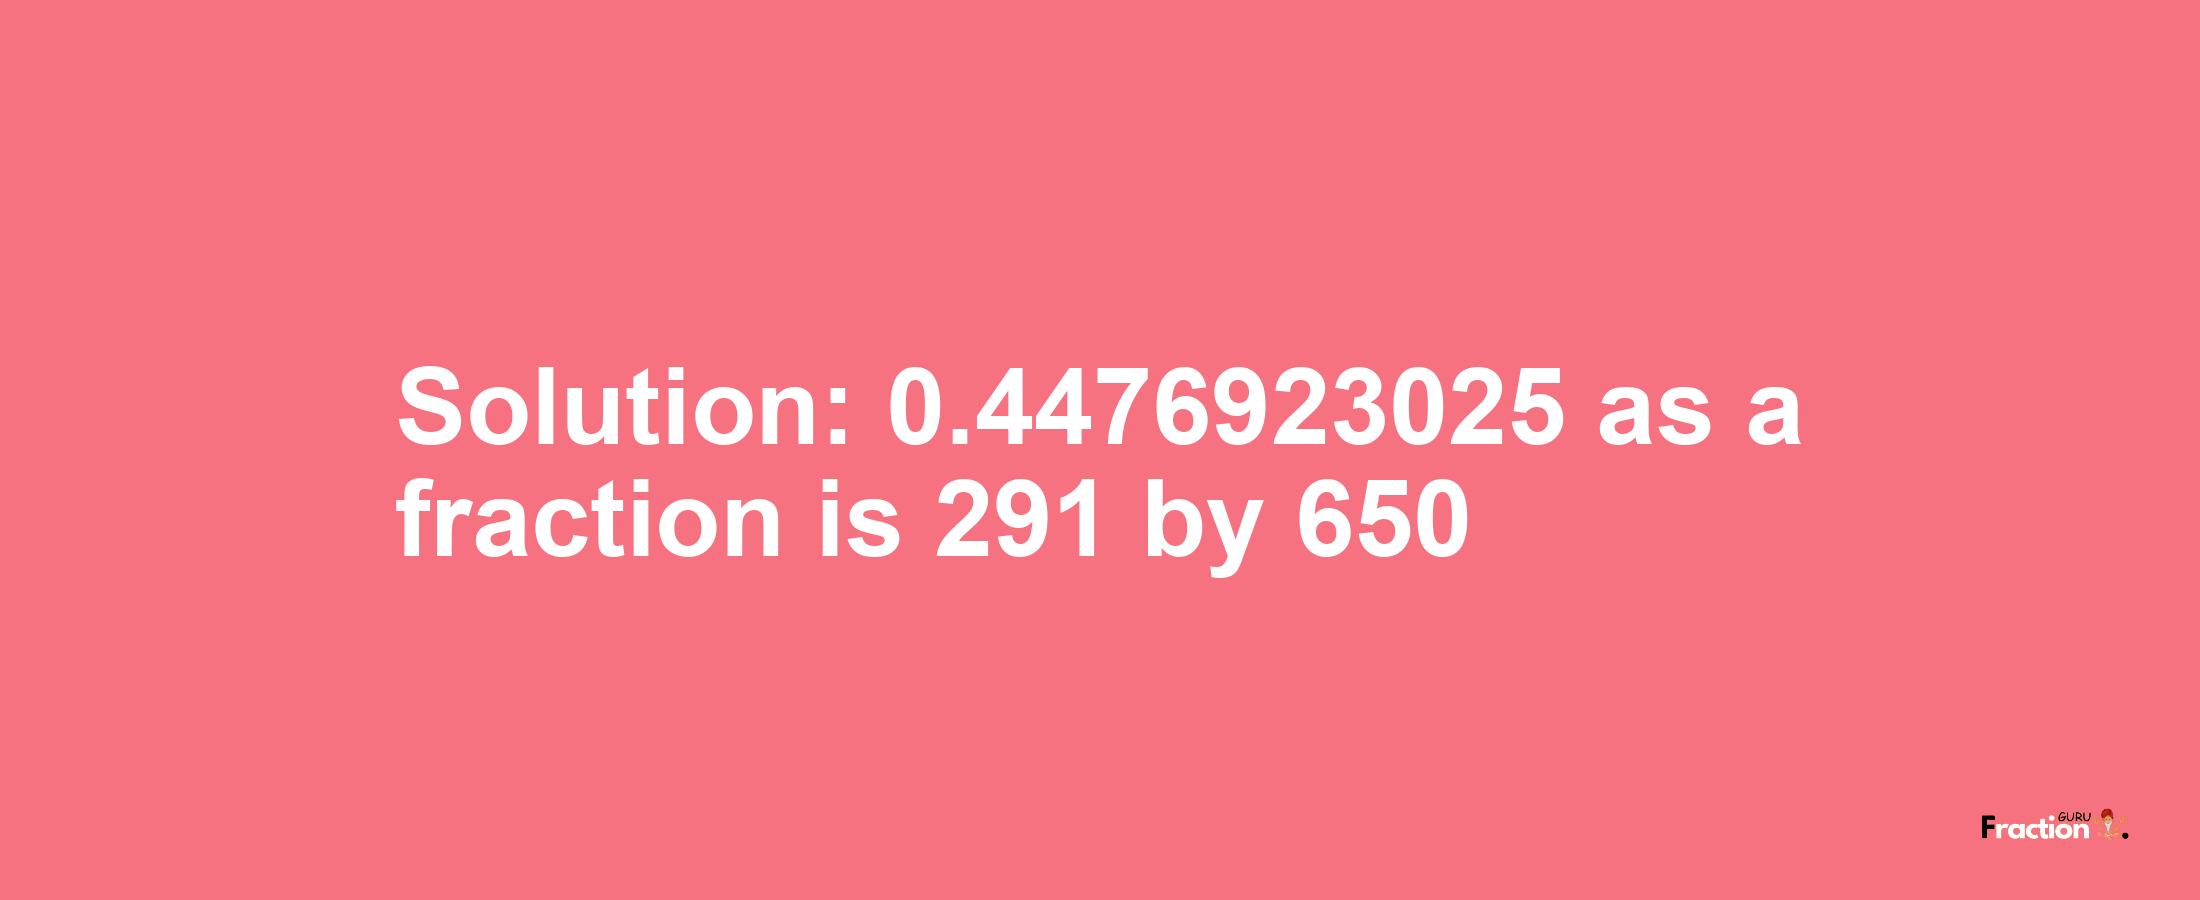 Solution:0.4476923025 as a fraction is 291/650